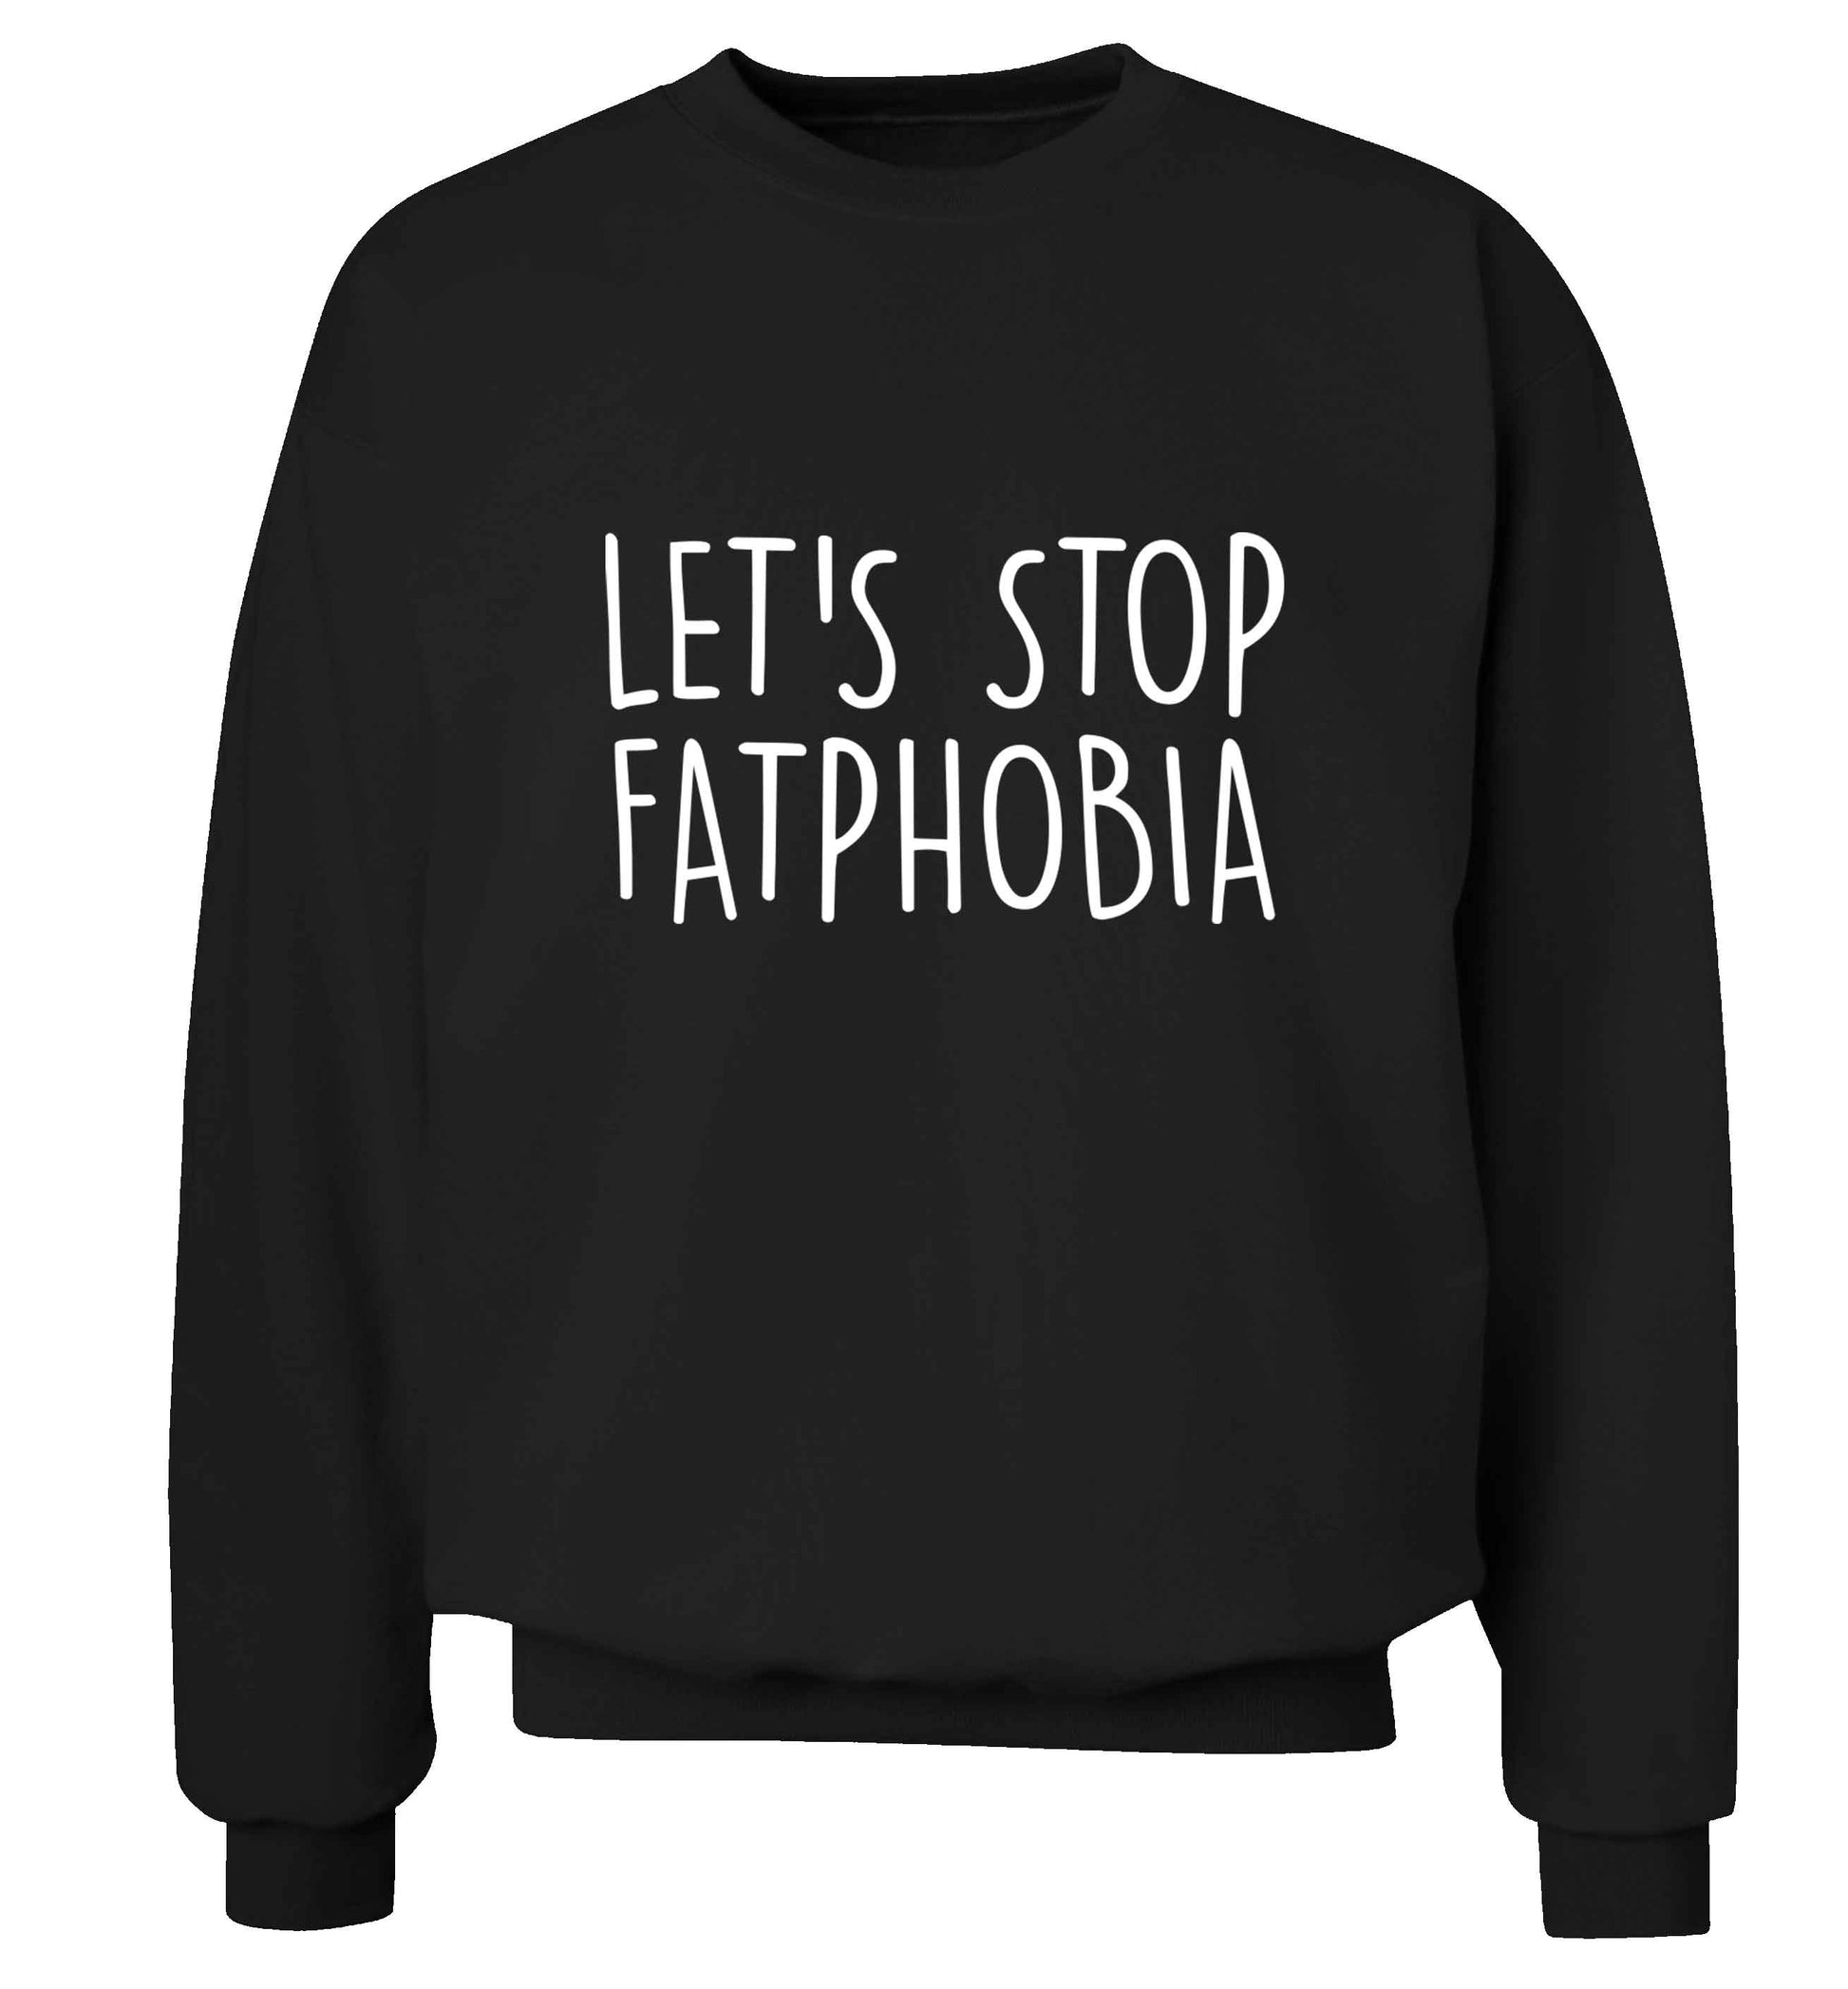 Let's stop fatphobia adult's unisex black sweater 2XL